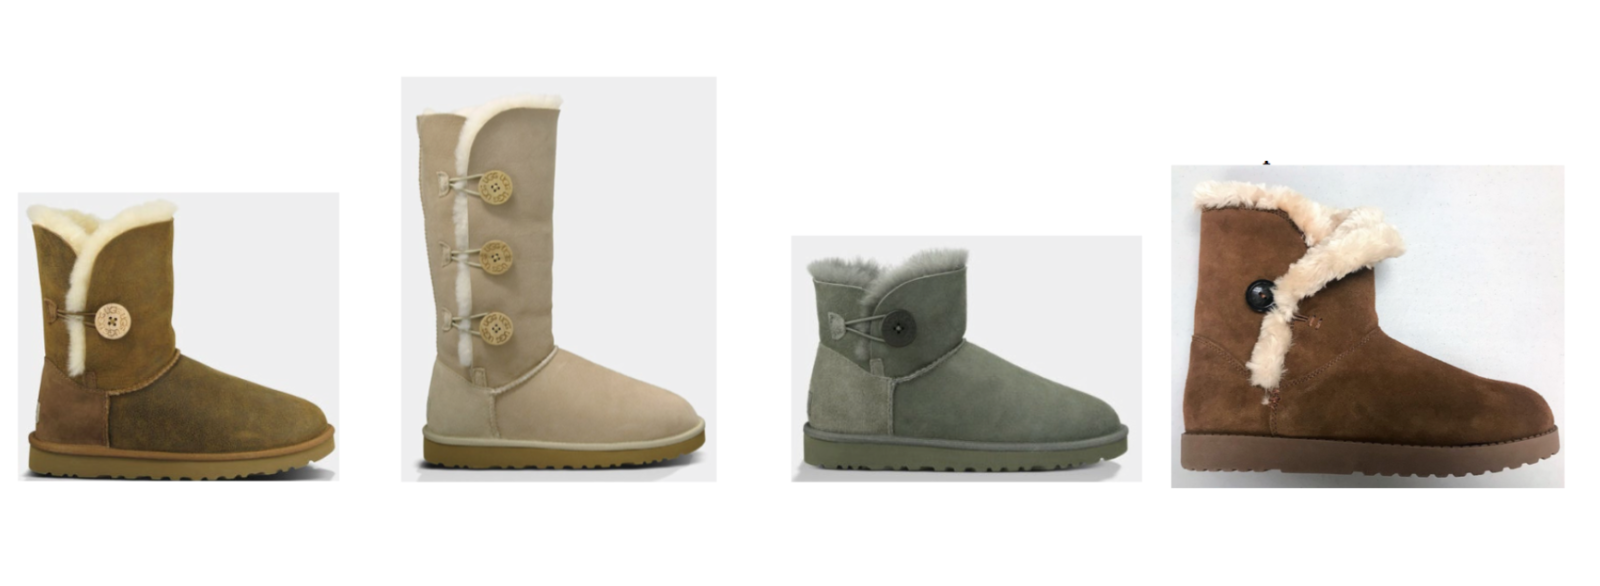 baby ugg boots target